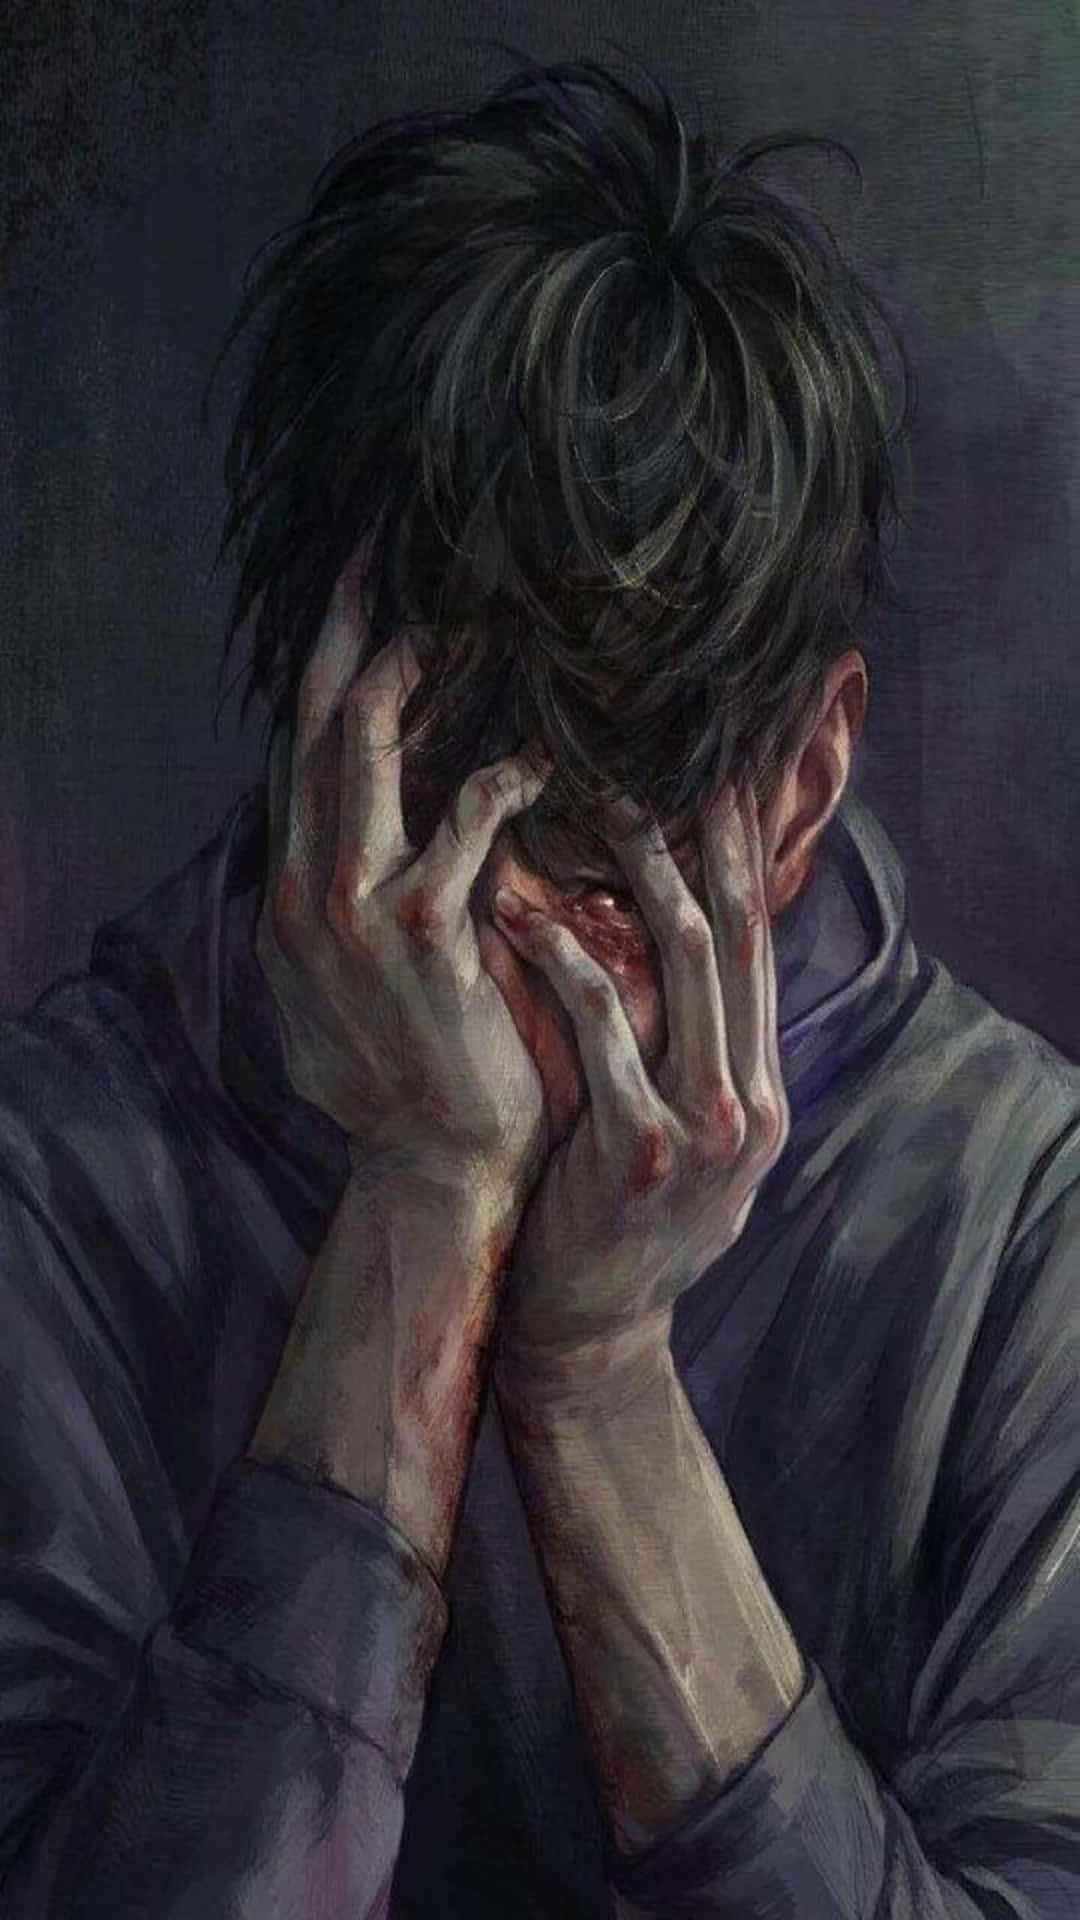 Sad Crying Anime Guy Covering His Face Wallpaper